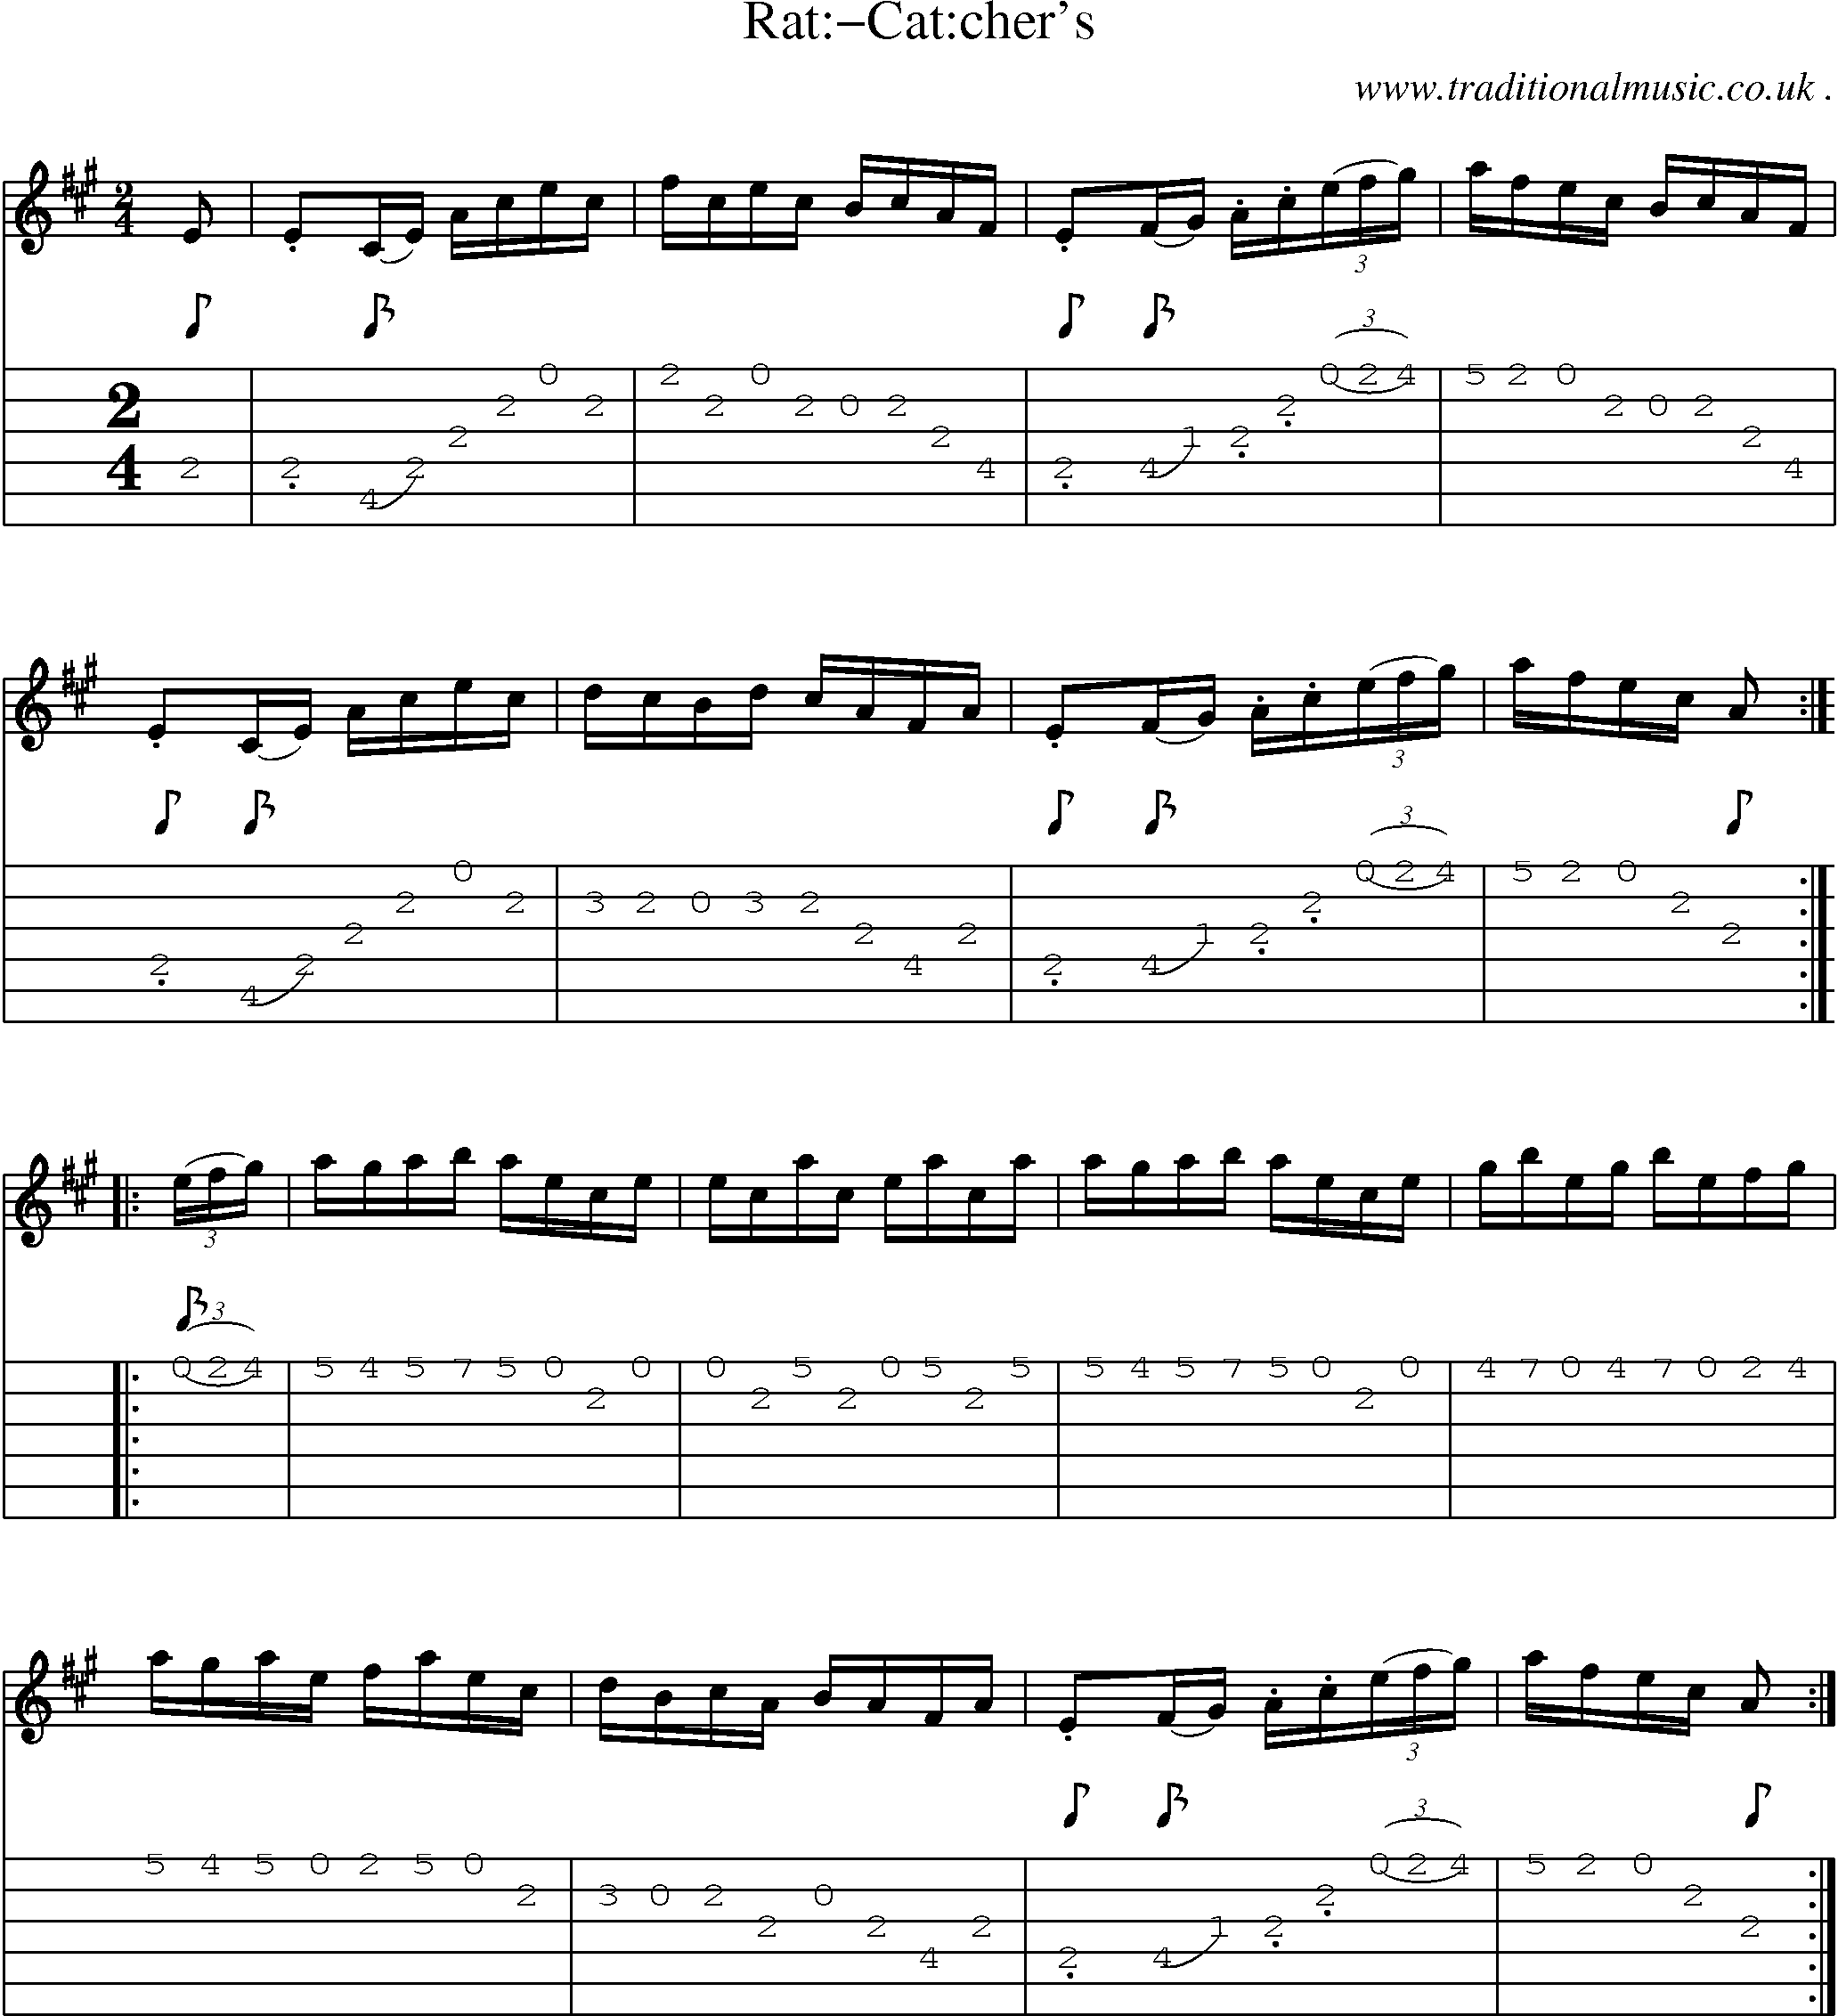 Sheet-Music and Guitar Tabs for Rat-catchers